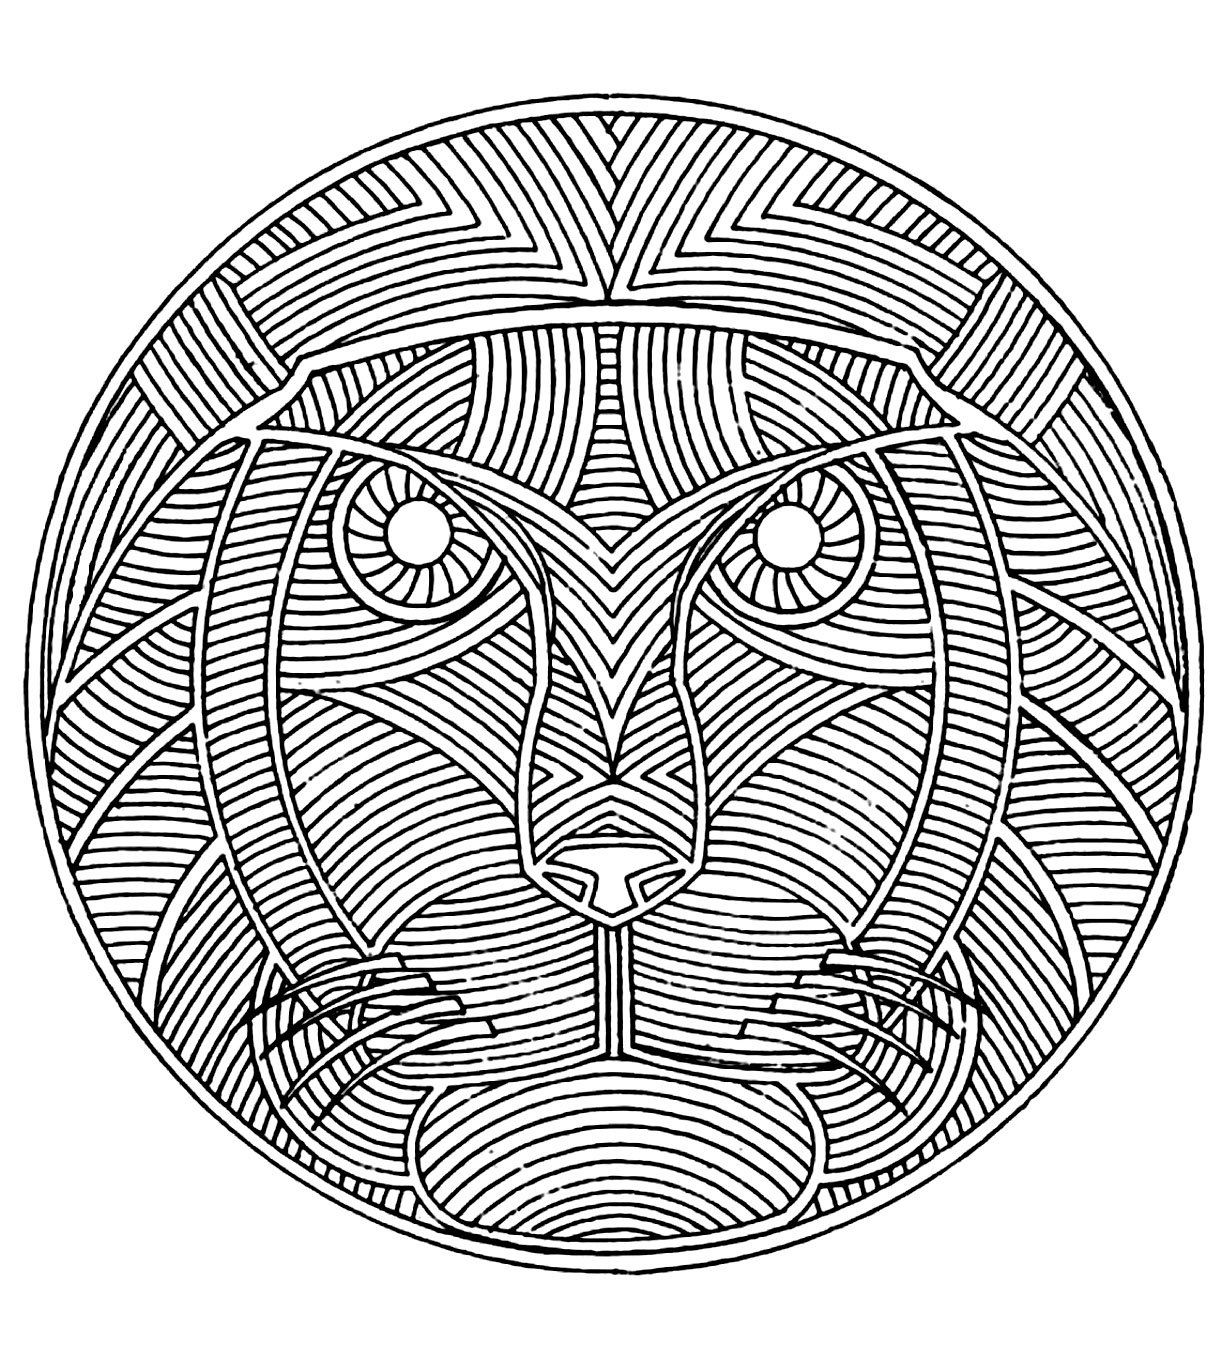 Africa mandala - Africa Adult Coloring Pages